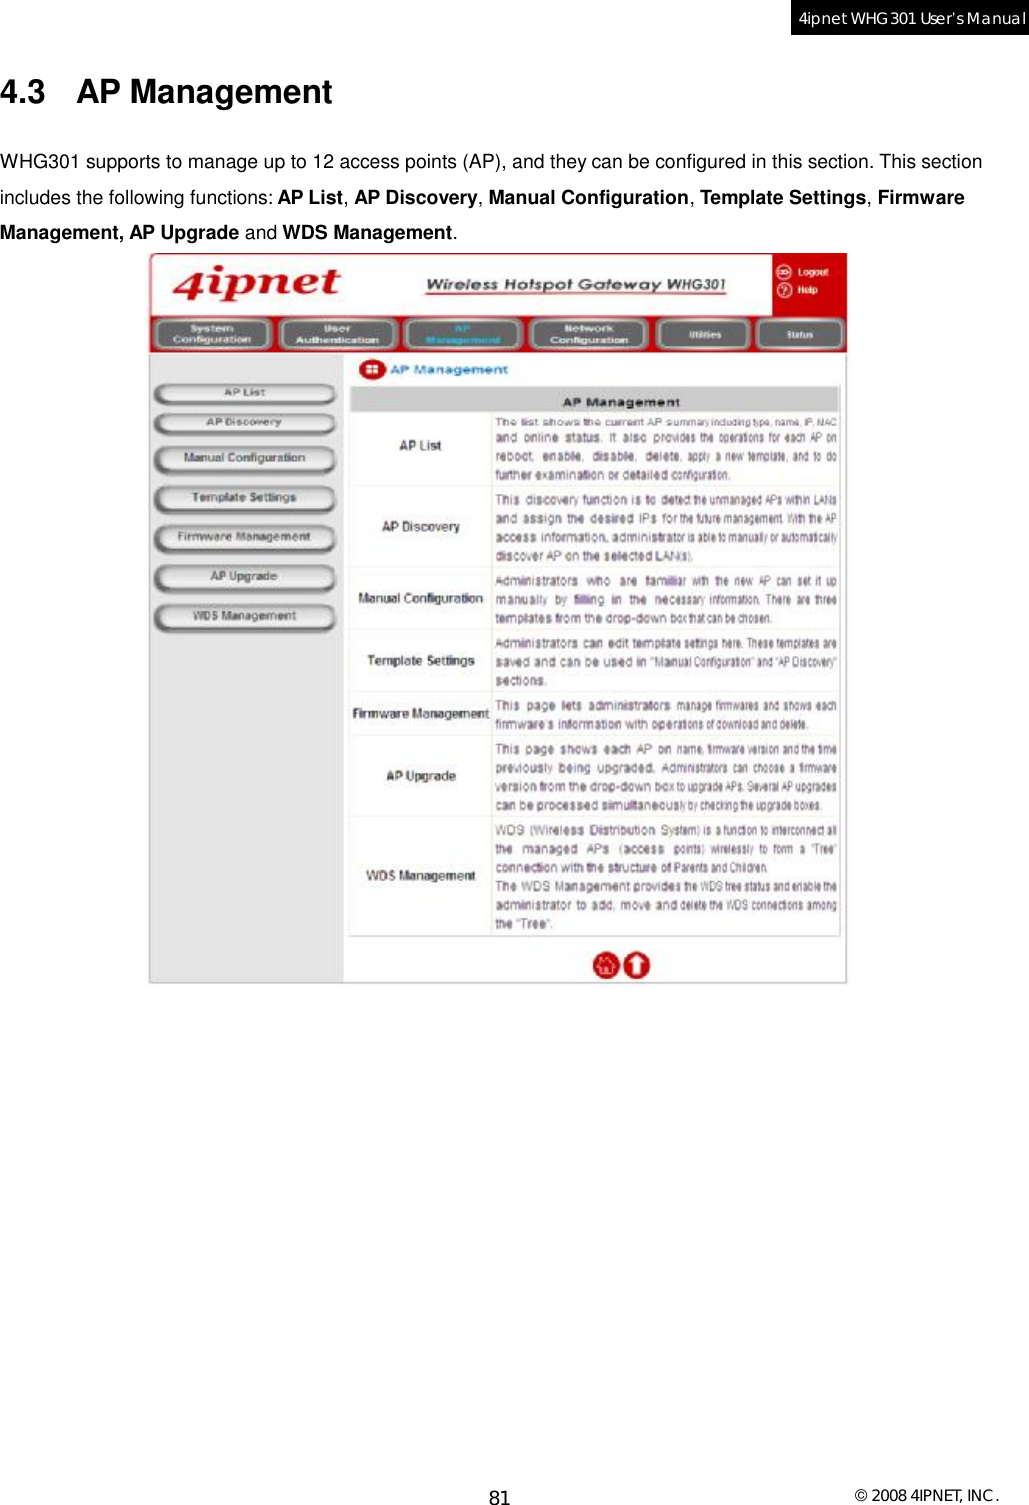  © 2008 4IPNET, INC. 81 4ipnet WHG301 User’s Manual  4.3 AP Management WHG301 supports to manage up to 12 access points (AP), and they can be configured in this section. This section includes the following functions: AP List, AP Discovery, Manual Configuration, Template Settings, Firmware Management, AP Upgrade and WDS Management.     